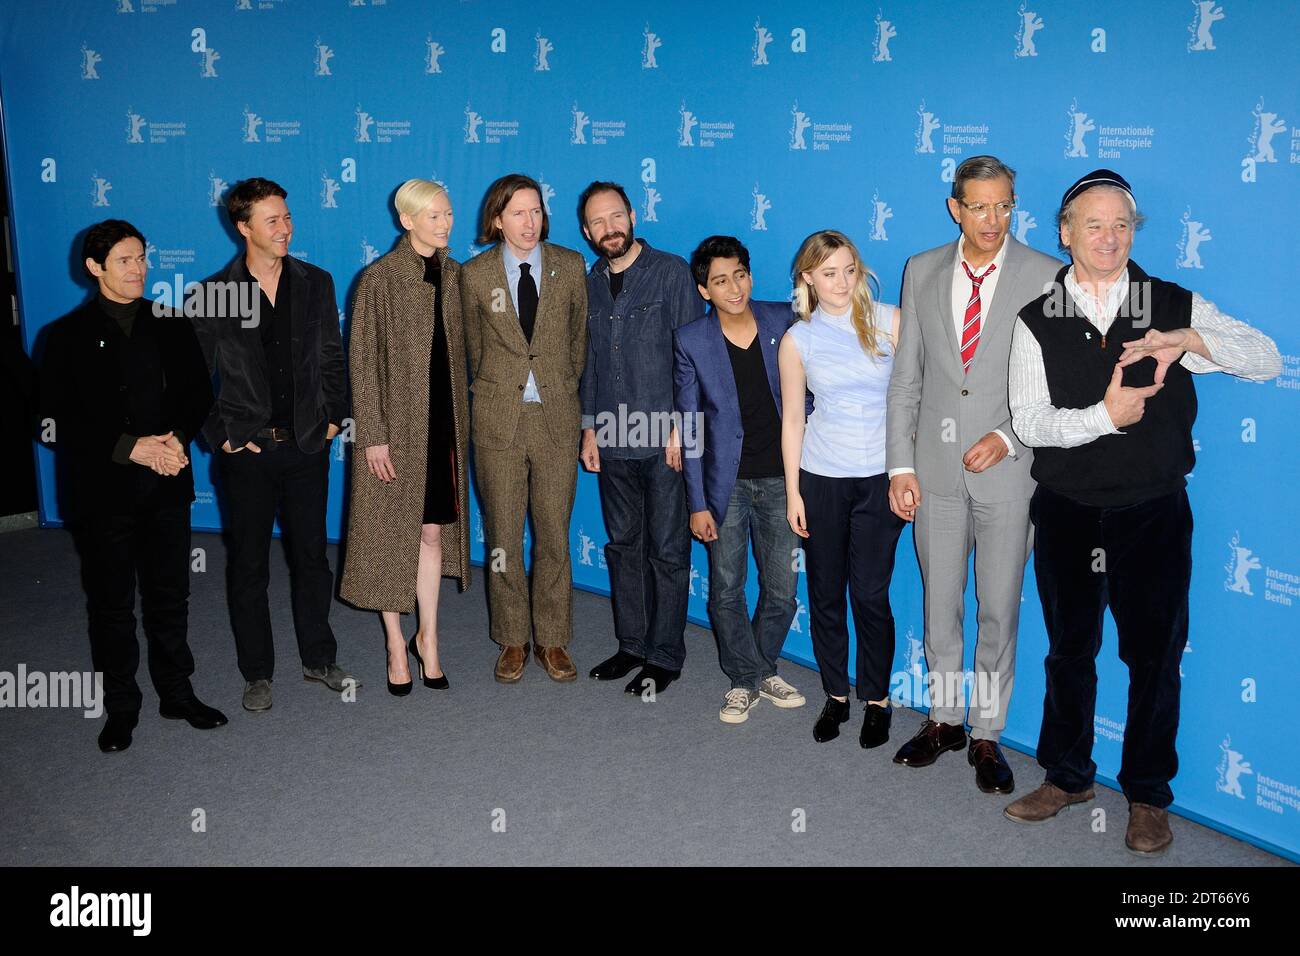 Actors Willem Dafoe, Edward Norton, Tilda Swinton, director Wes Anderson  and actors Ralph Fiennes, Tony Revolori, Saoirse Ronan, Jeff Goldblum and  Bill Murray attending 'The Grand Budapest Hotel' Photocall during the 64th